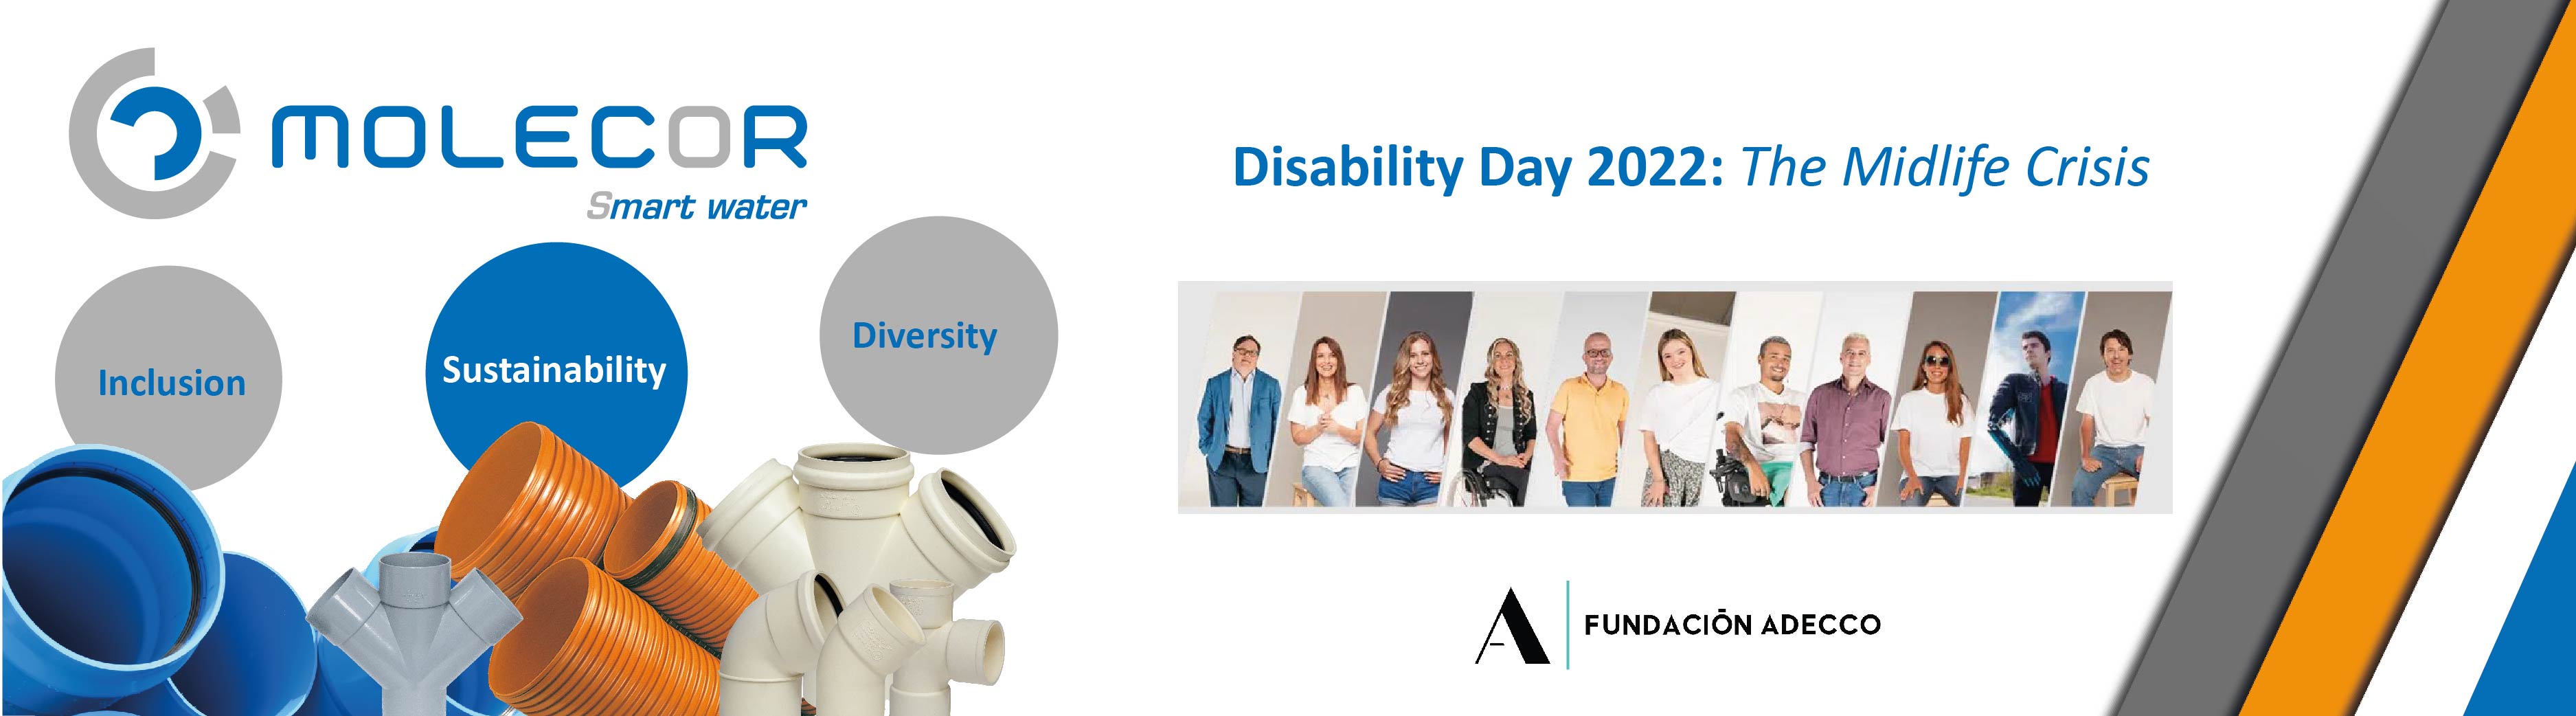 Molecor collaborates in the International Day of People with Disabilities